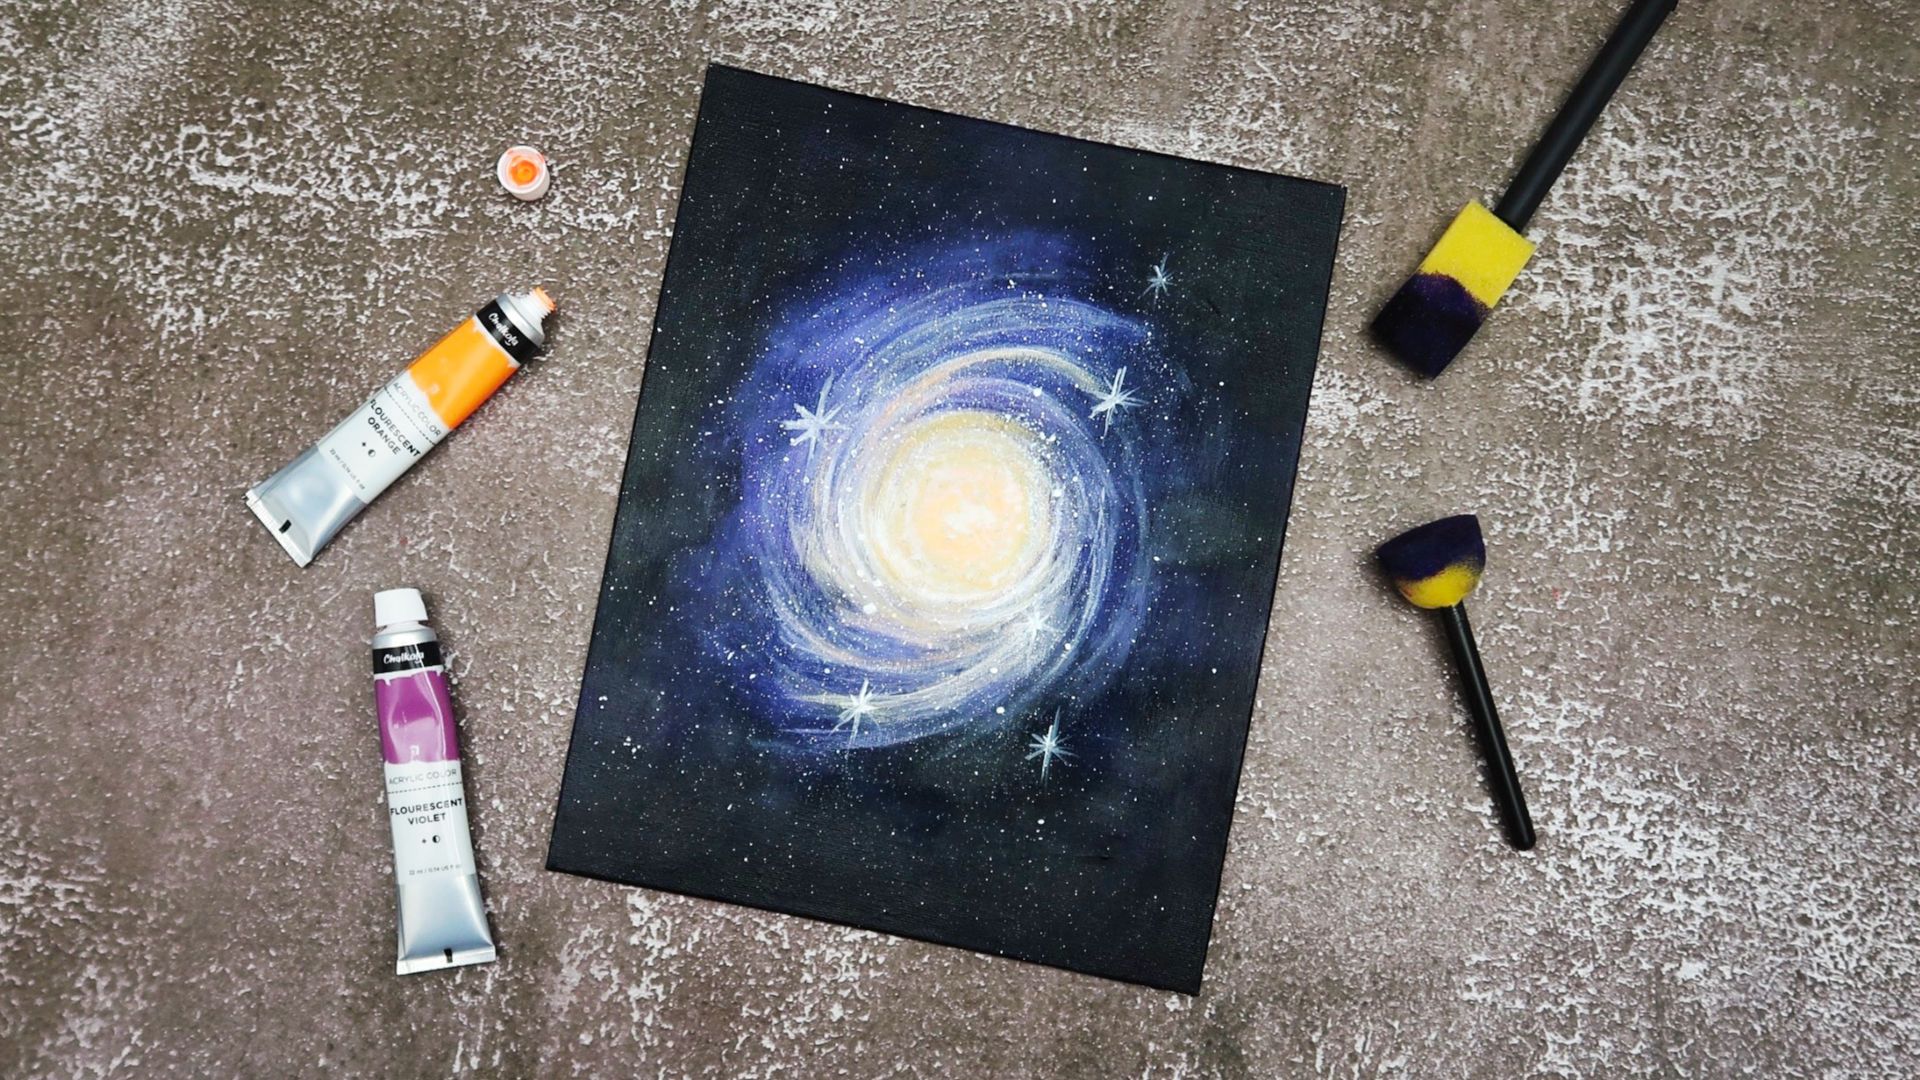 Acrylic Paint on Fabric Tutorial - Step-by-Step Instructions